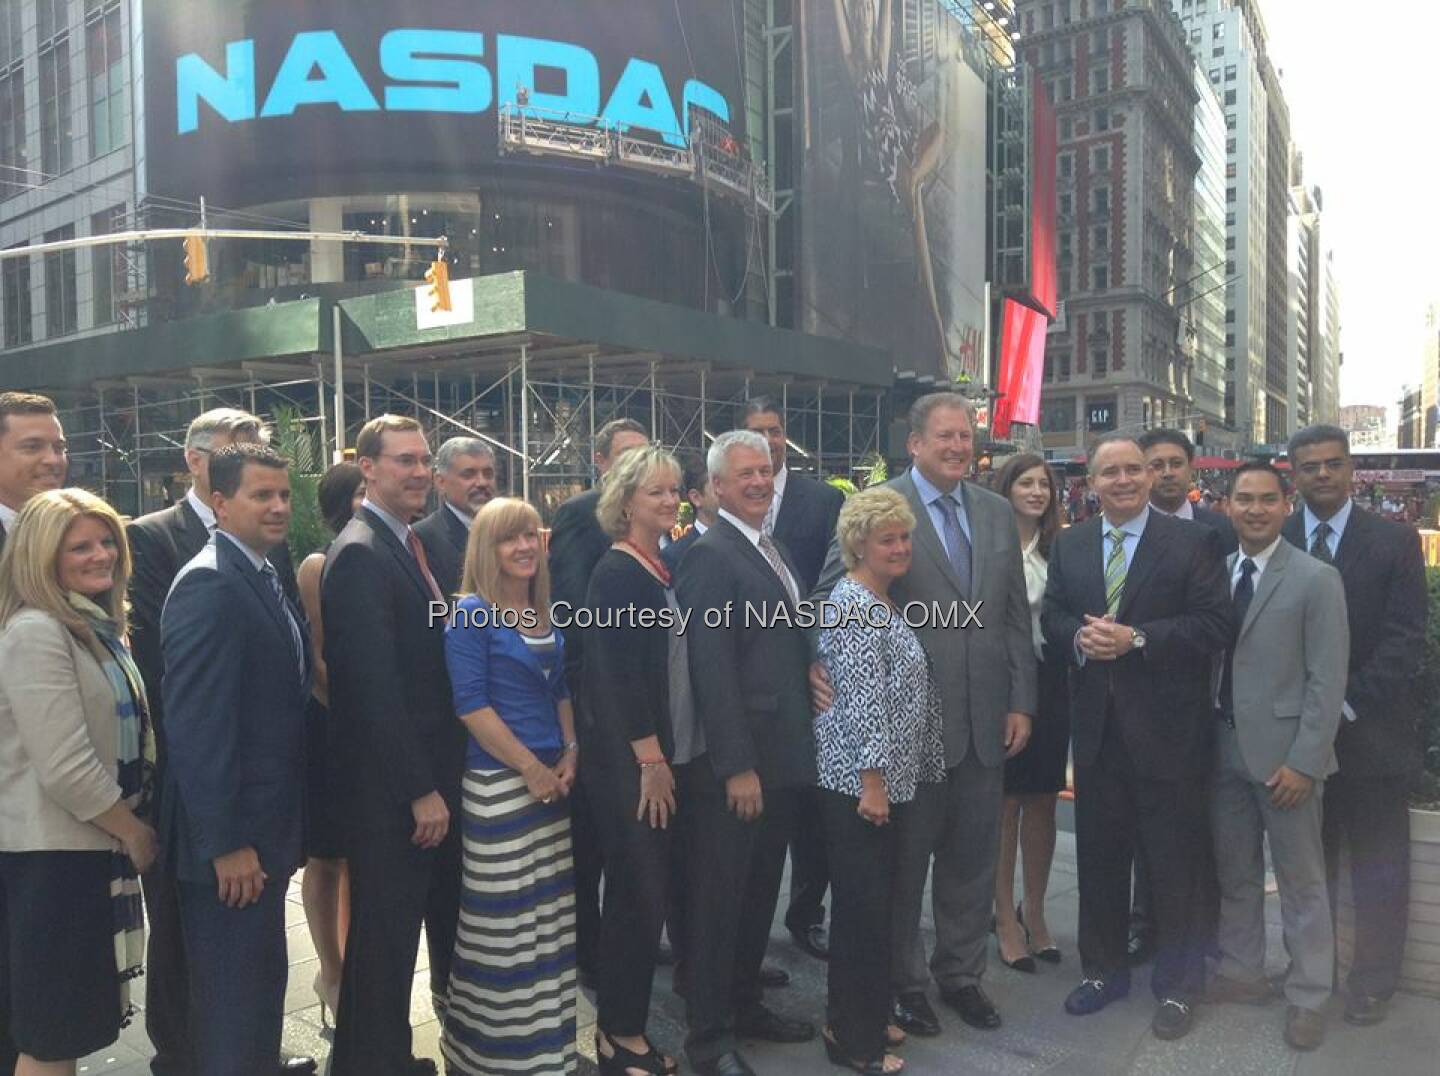 Jason Industries visited Times Square to ring the #NASDAQ Opening Bell today! #DreamBIG $JASN  Source: http://facebook.com/NASDAQ